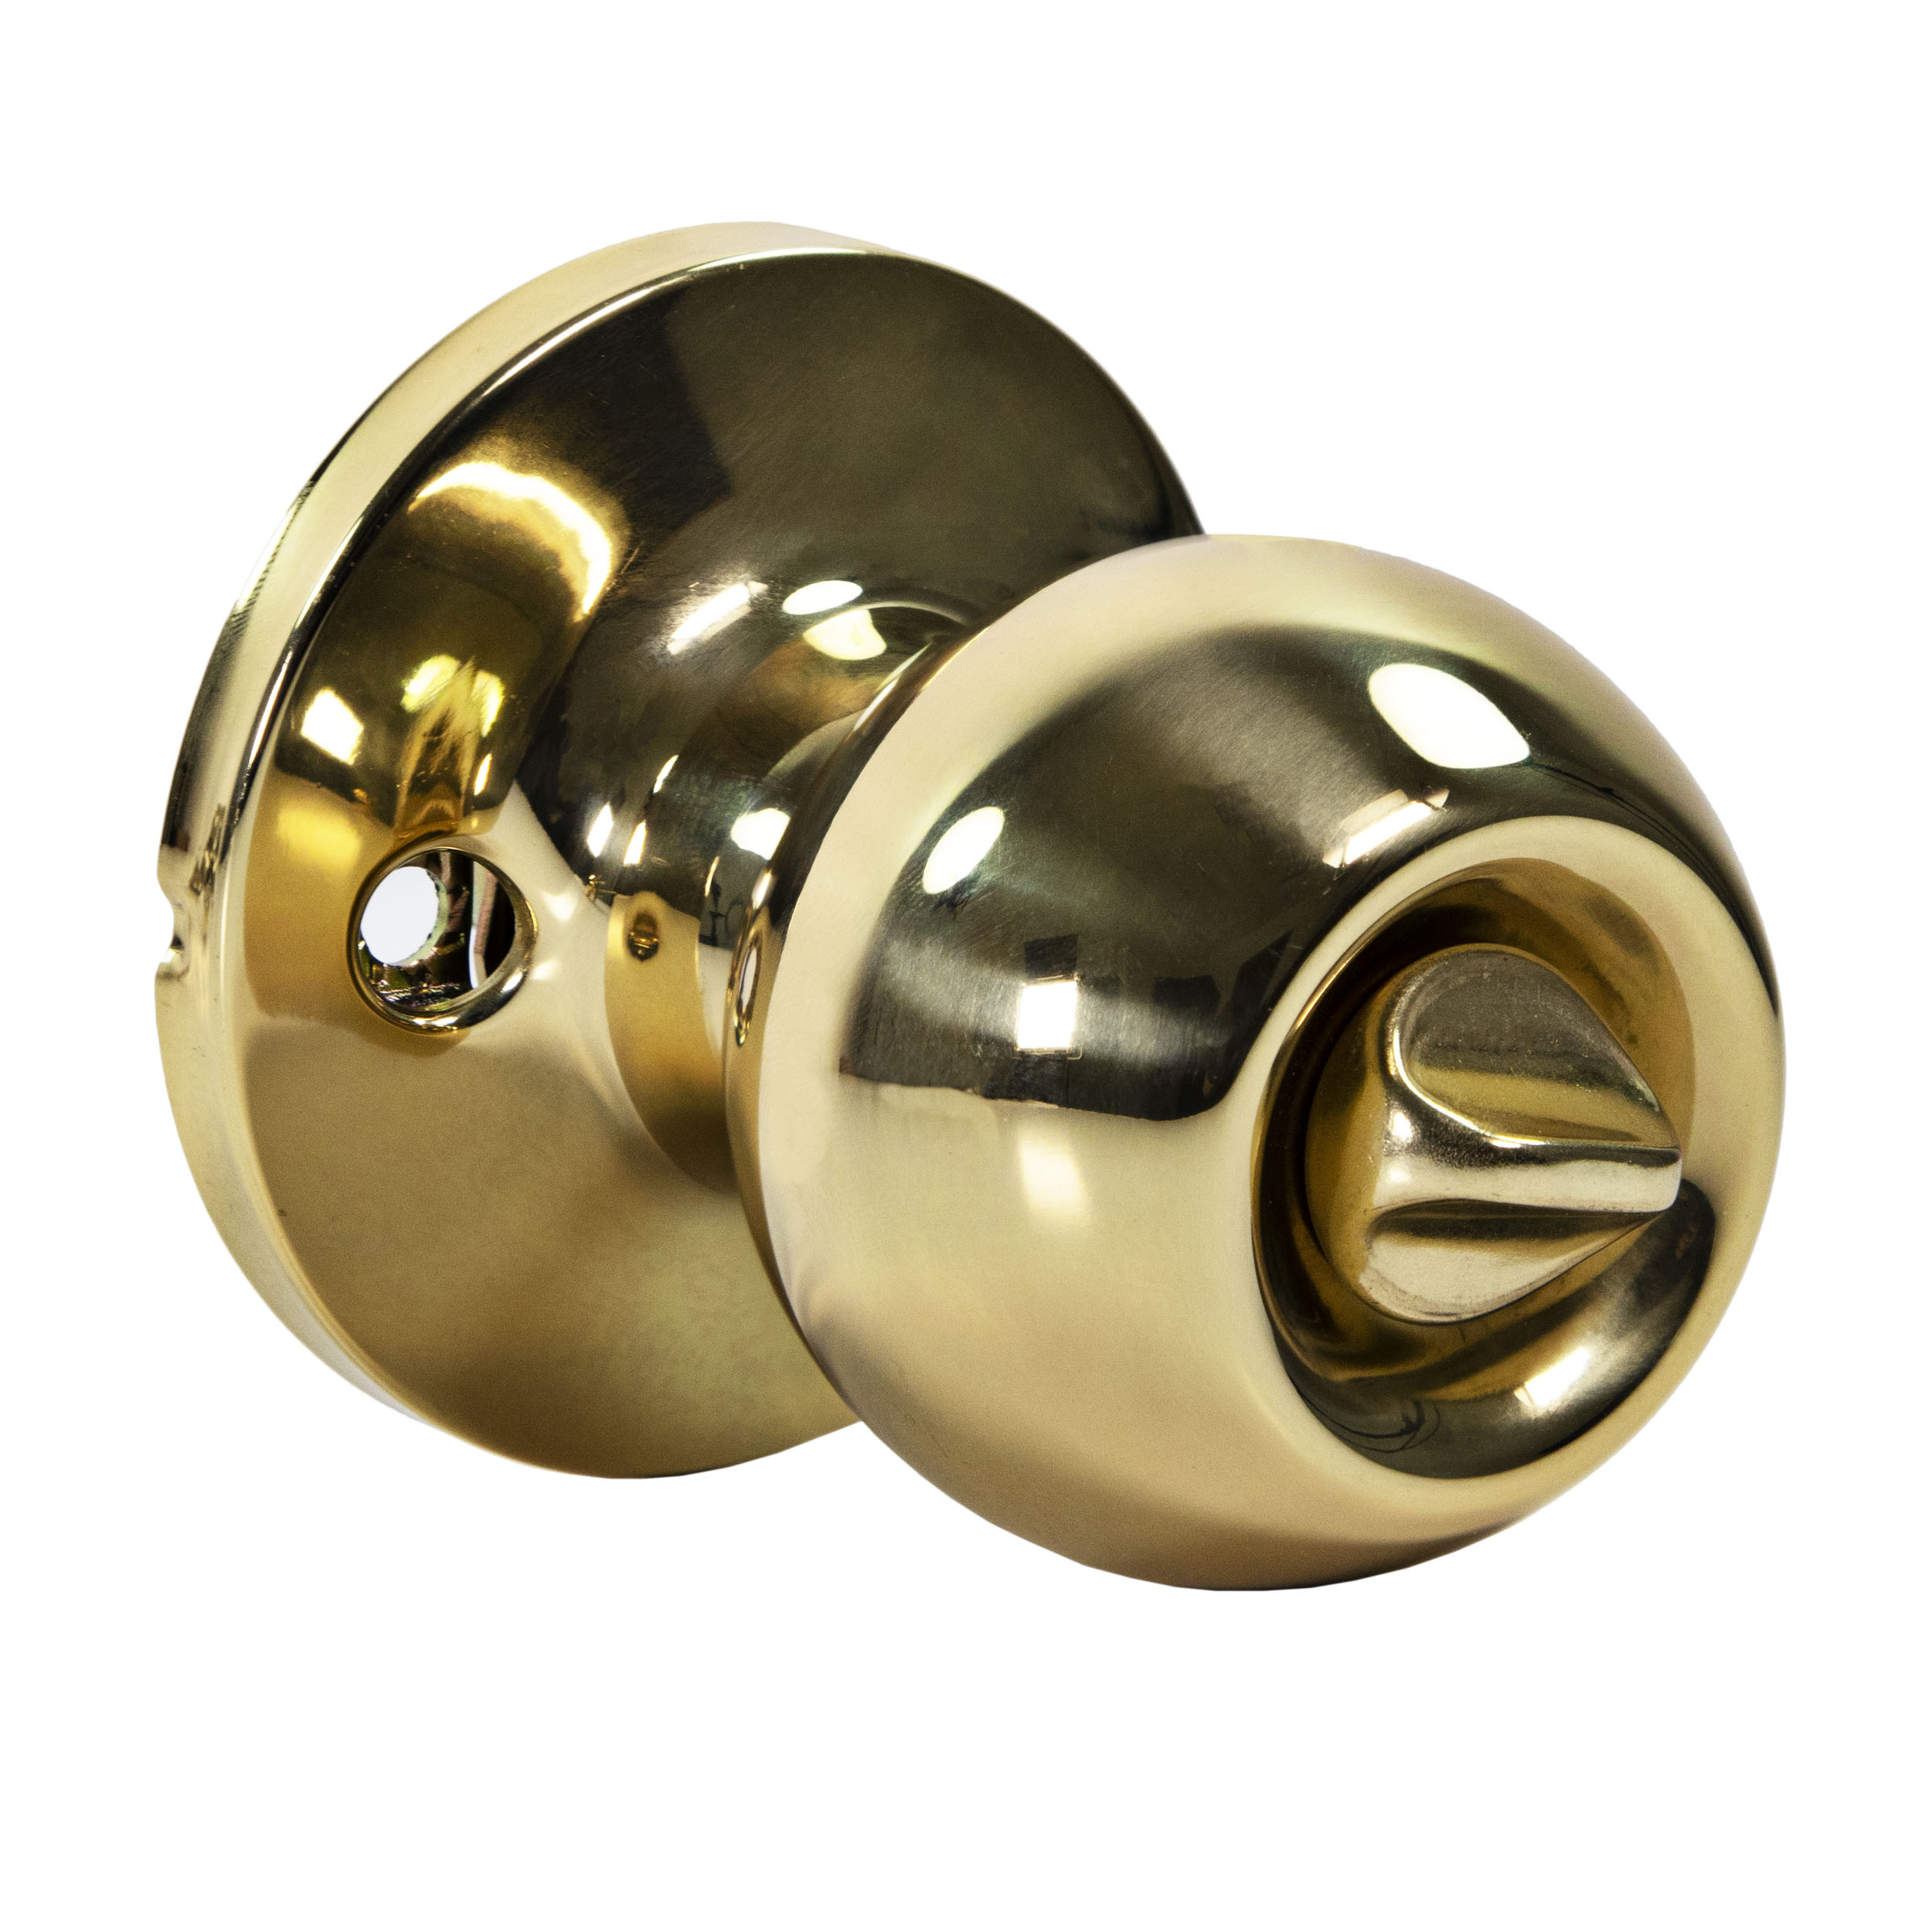 Ultra Security Chestnut Hill Keyed Entry Ball Door Knob - Security Keyed Entry Lockset, KW1 Keyed Entry, Fits 1-3/8" To 1-3/4" Thick Door (Polished Brass Finish, 1 Pack) - image 5 of 10